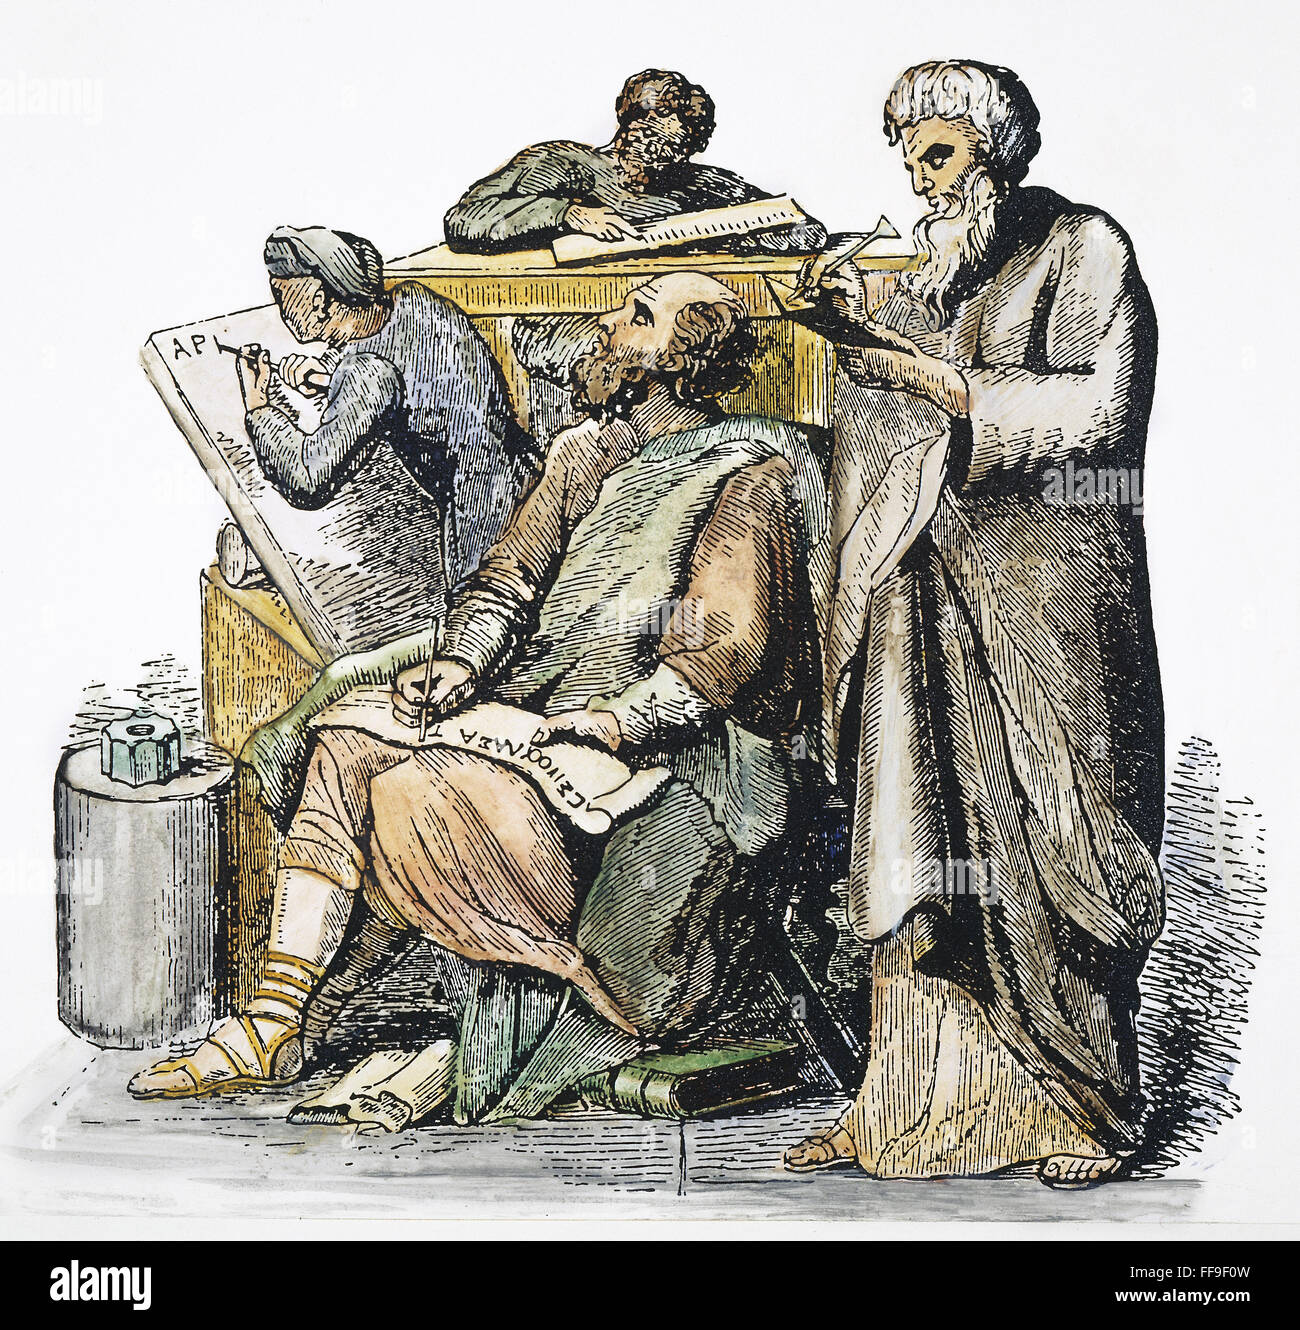 SCRIBES IN ANCIENT GREECE. /nWood engraving, 19th century. Stock Photo